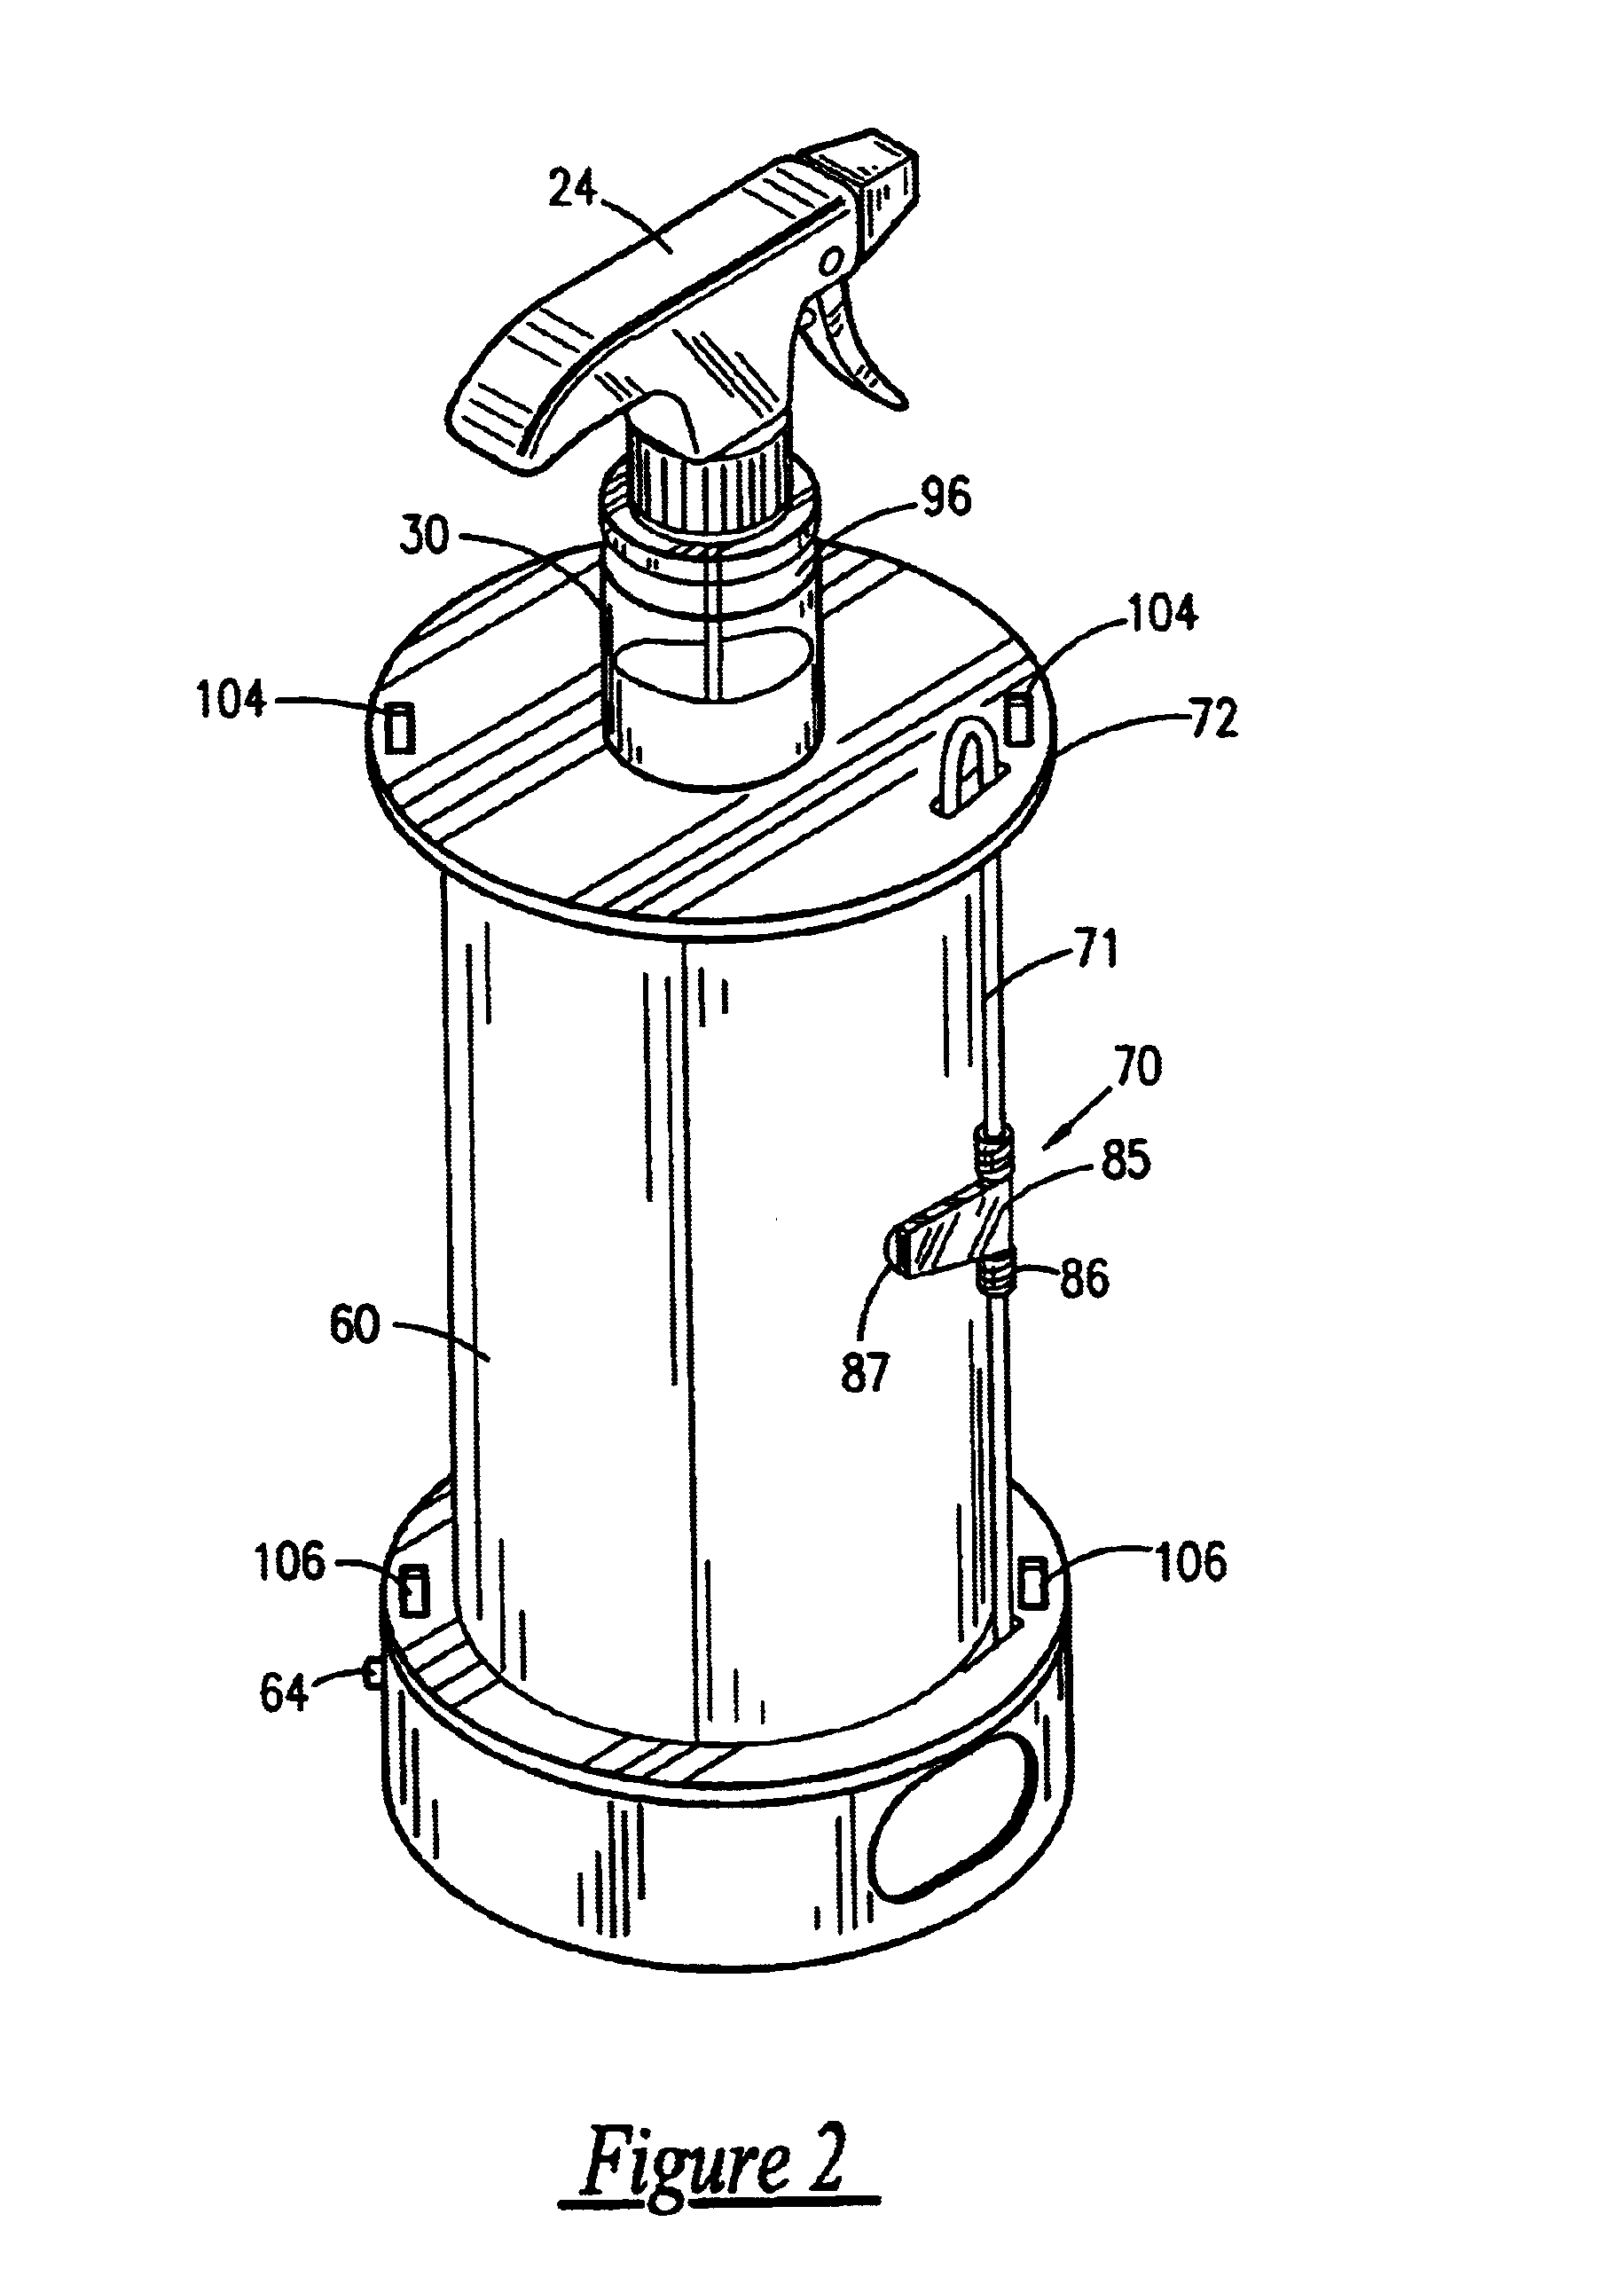 Combined portable, cleaning fluid spray apparatus and paper towel support and dispensing apparatus